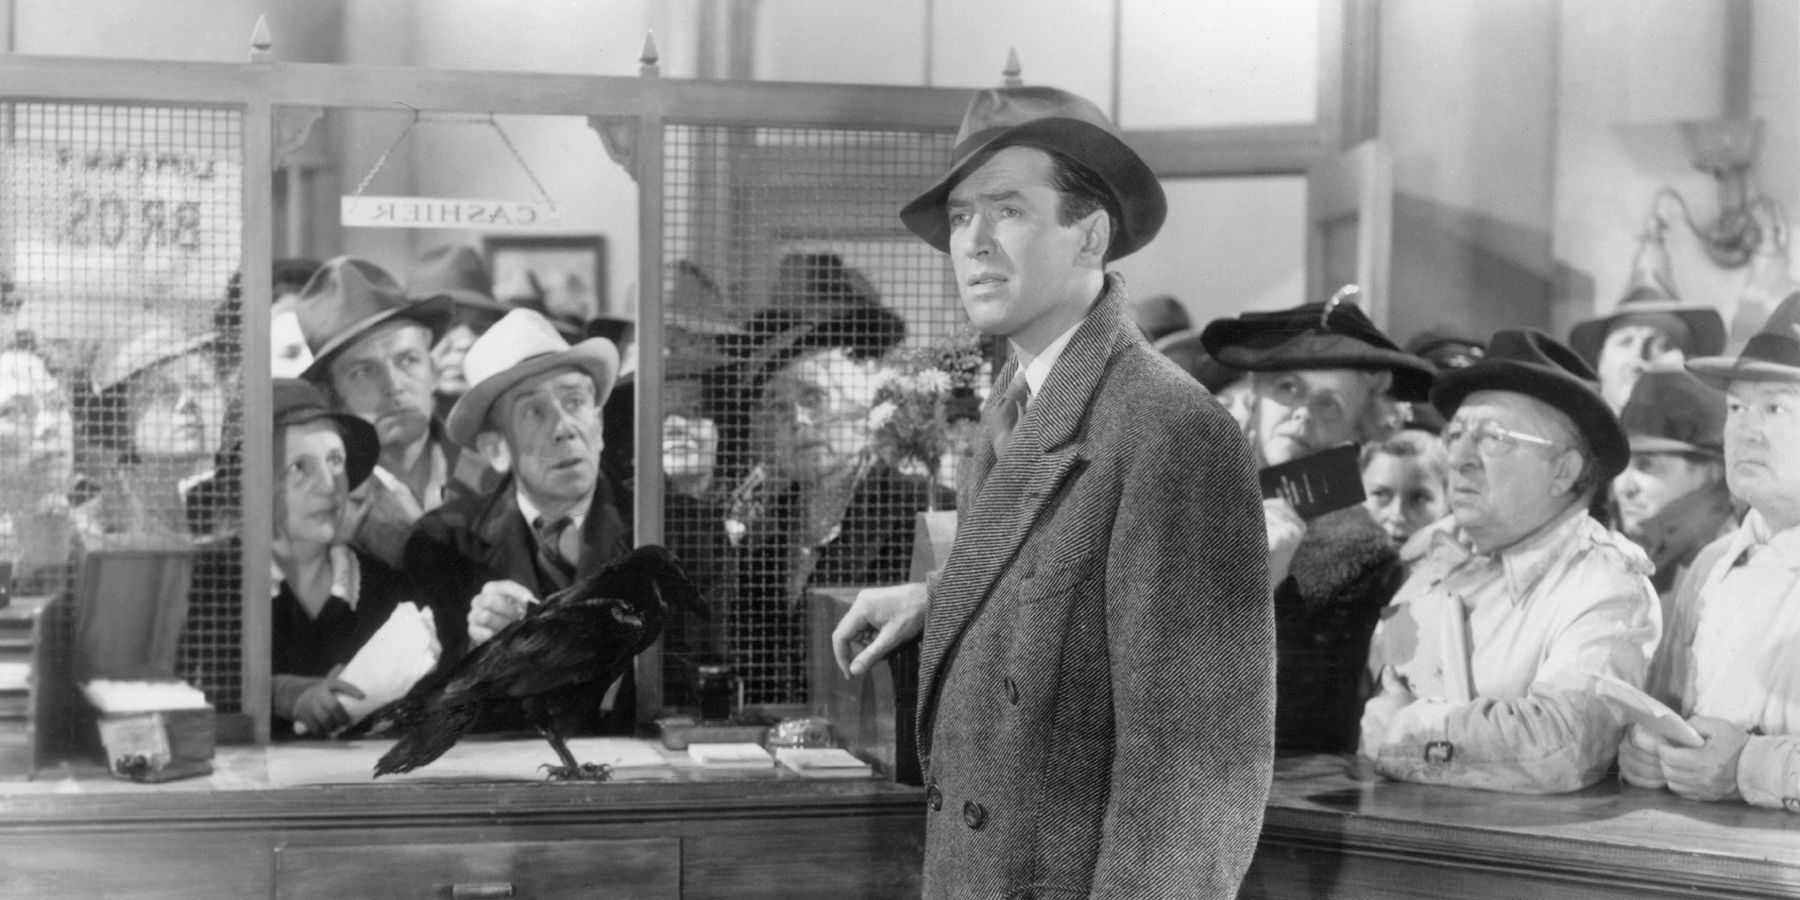 It's a Wonderful Life with James Stewart